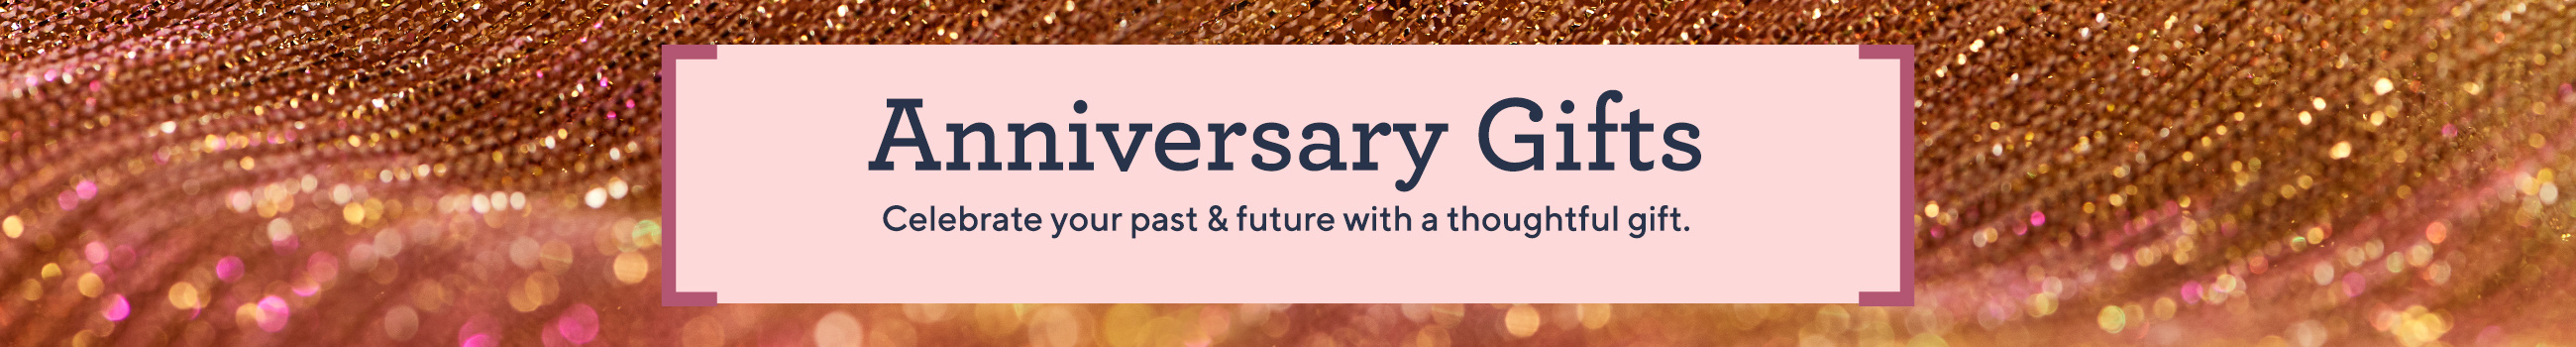 Anniversary Gifts — Celebrate your past & future with a thoughtful gift